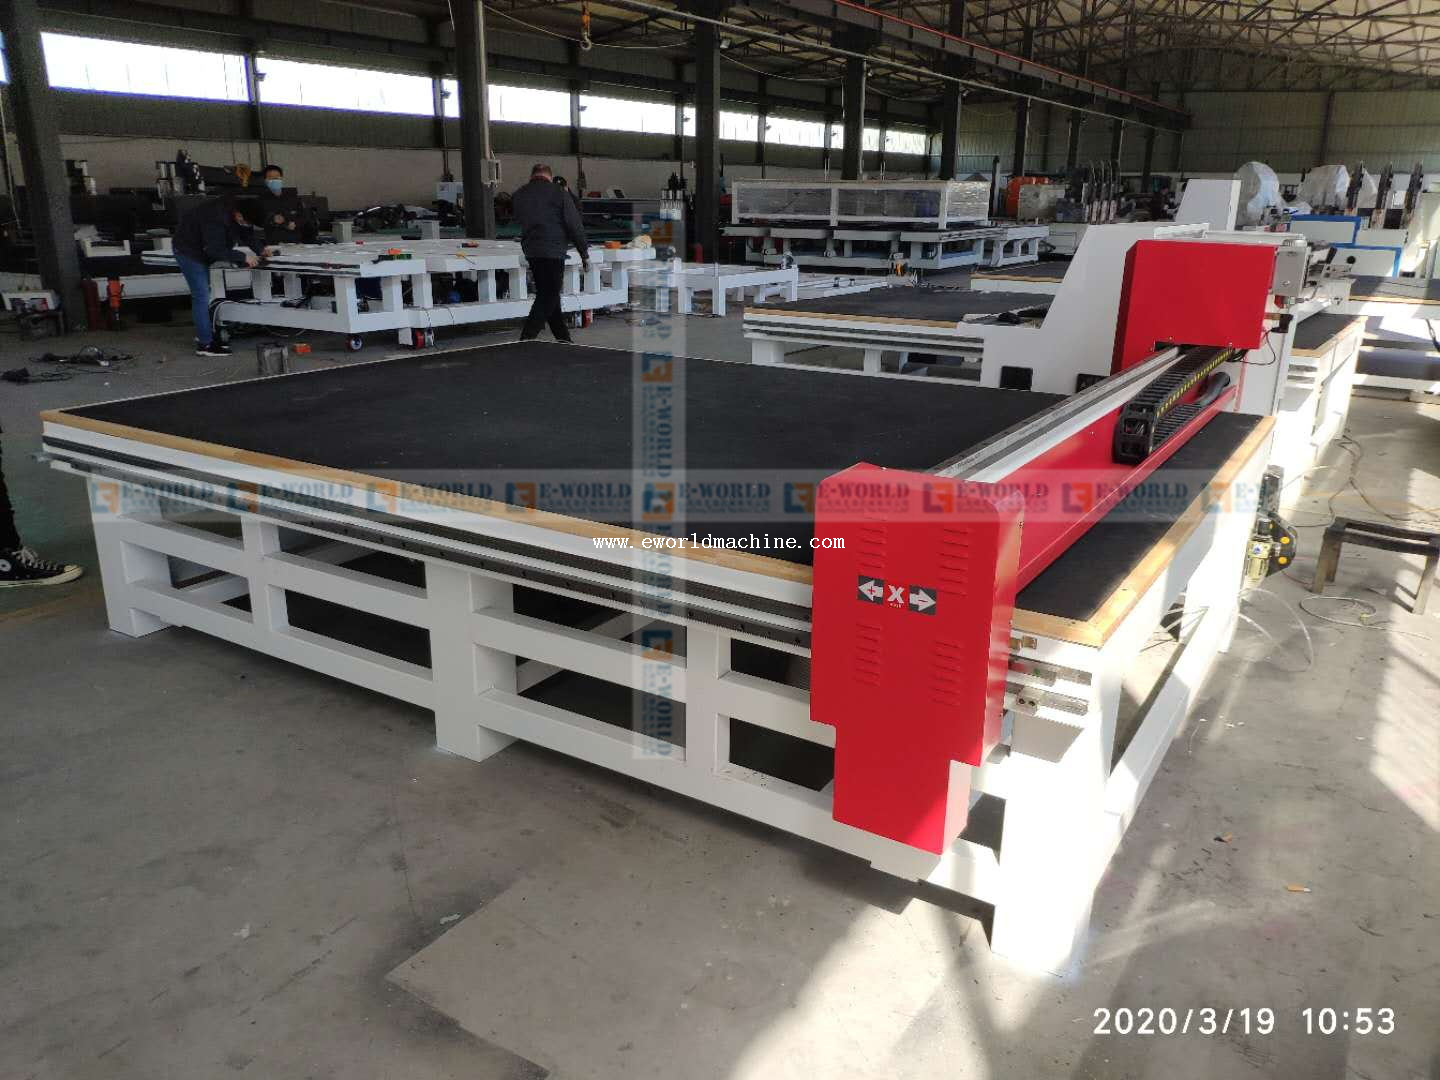 Full Automatic Shaped Glass Cutting Table